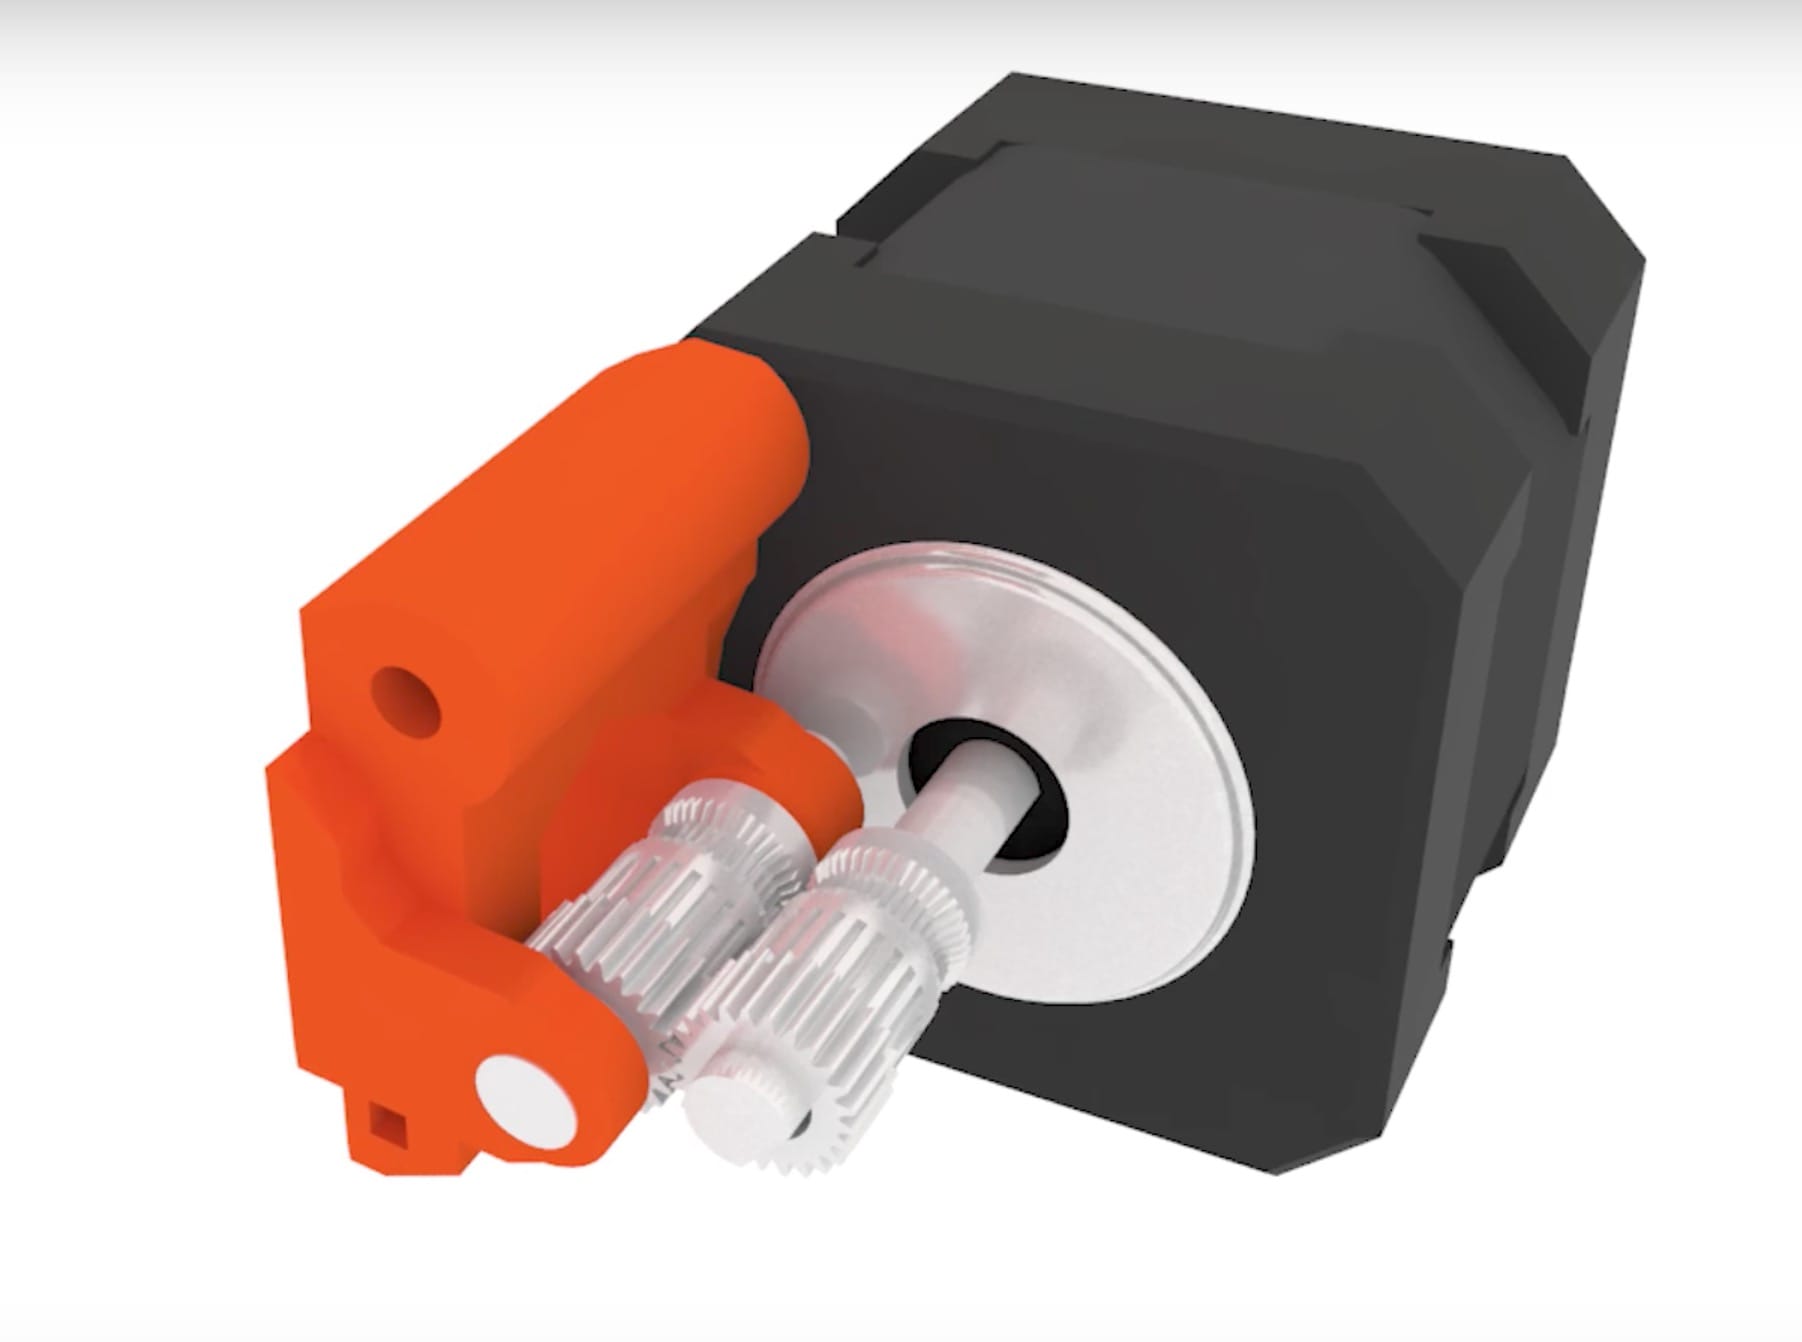  Detail of the Prusa i3 MK3's new Bondtech extruder, which grips the filament from both sides 